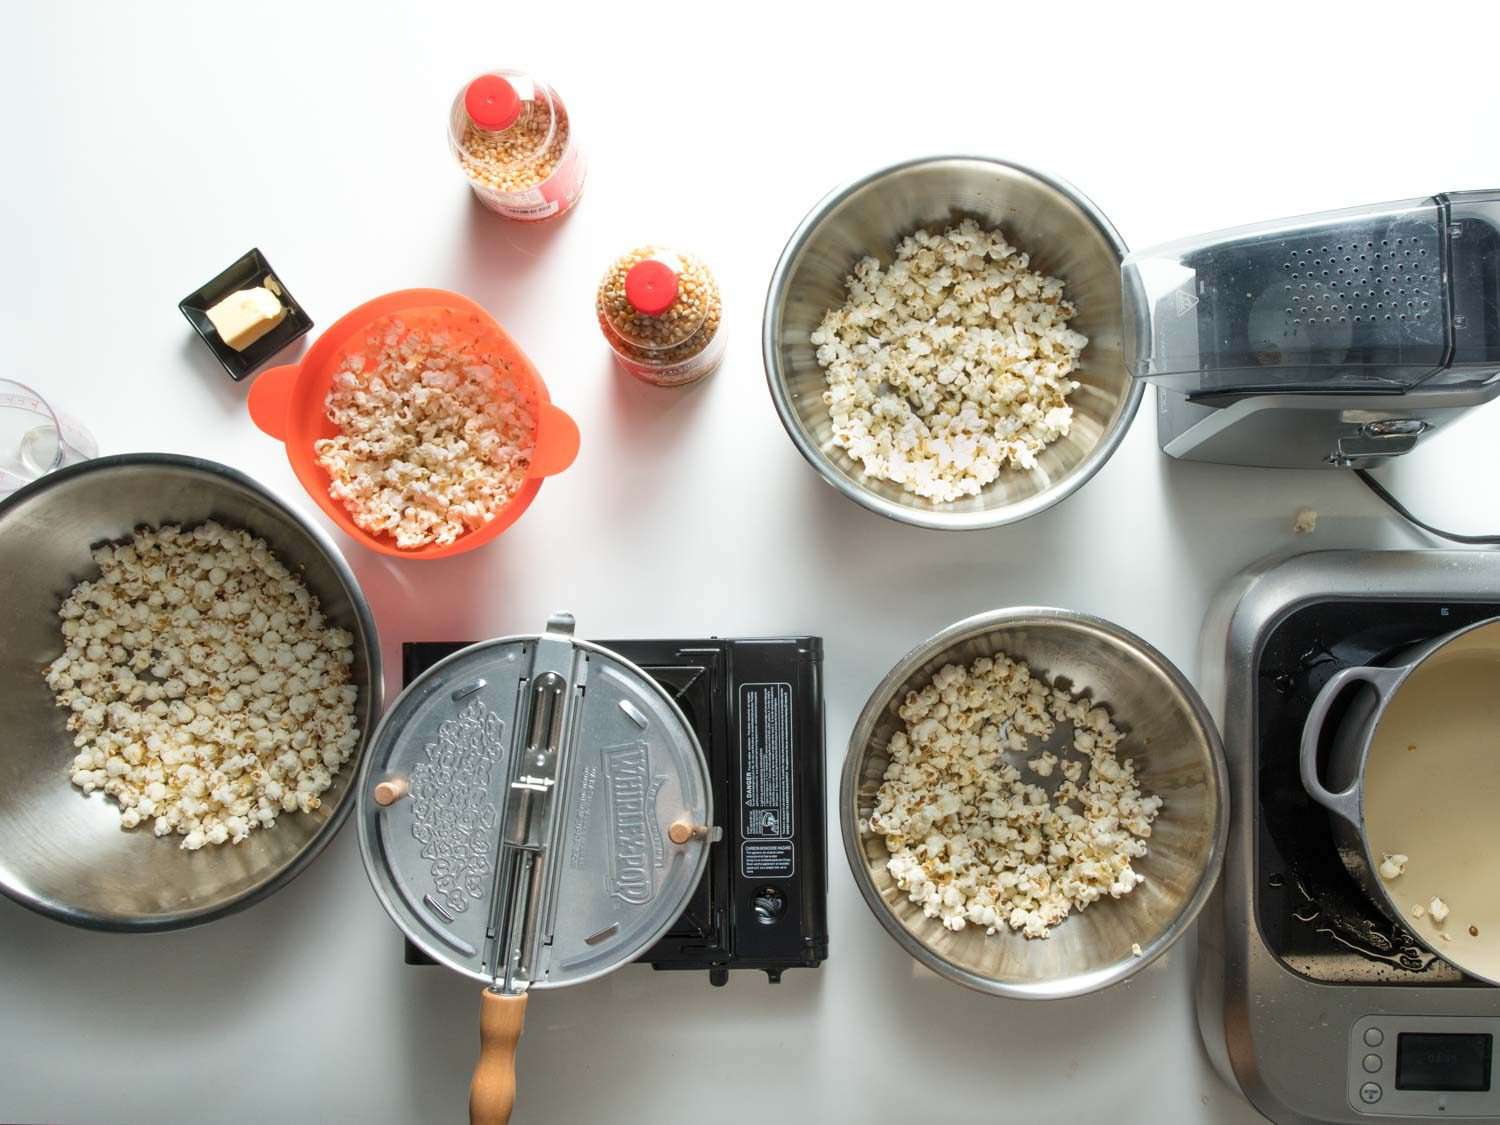 Popcorn being made with different methods